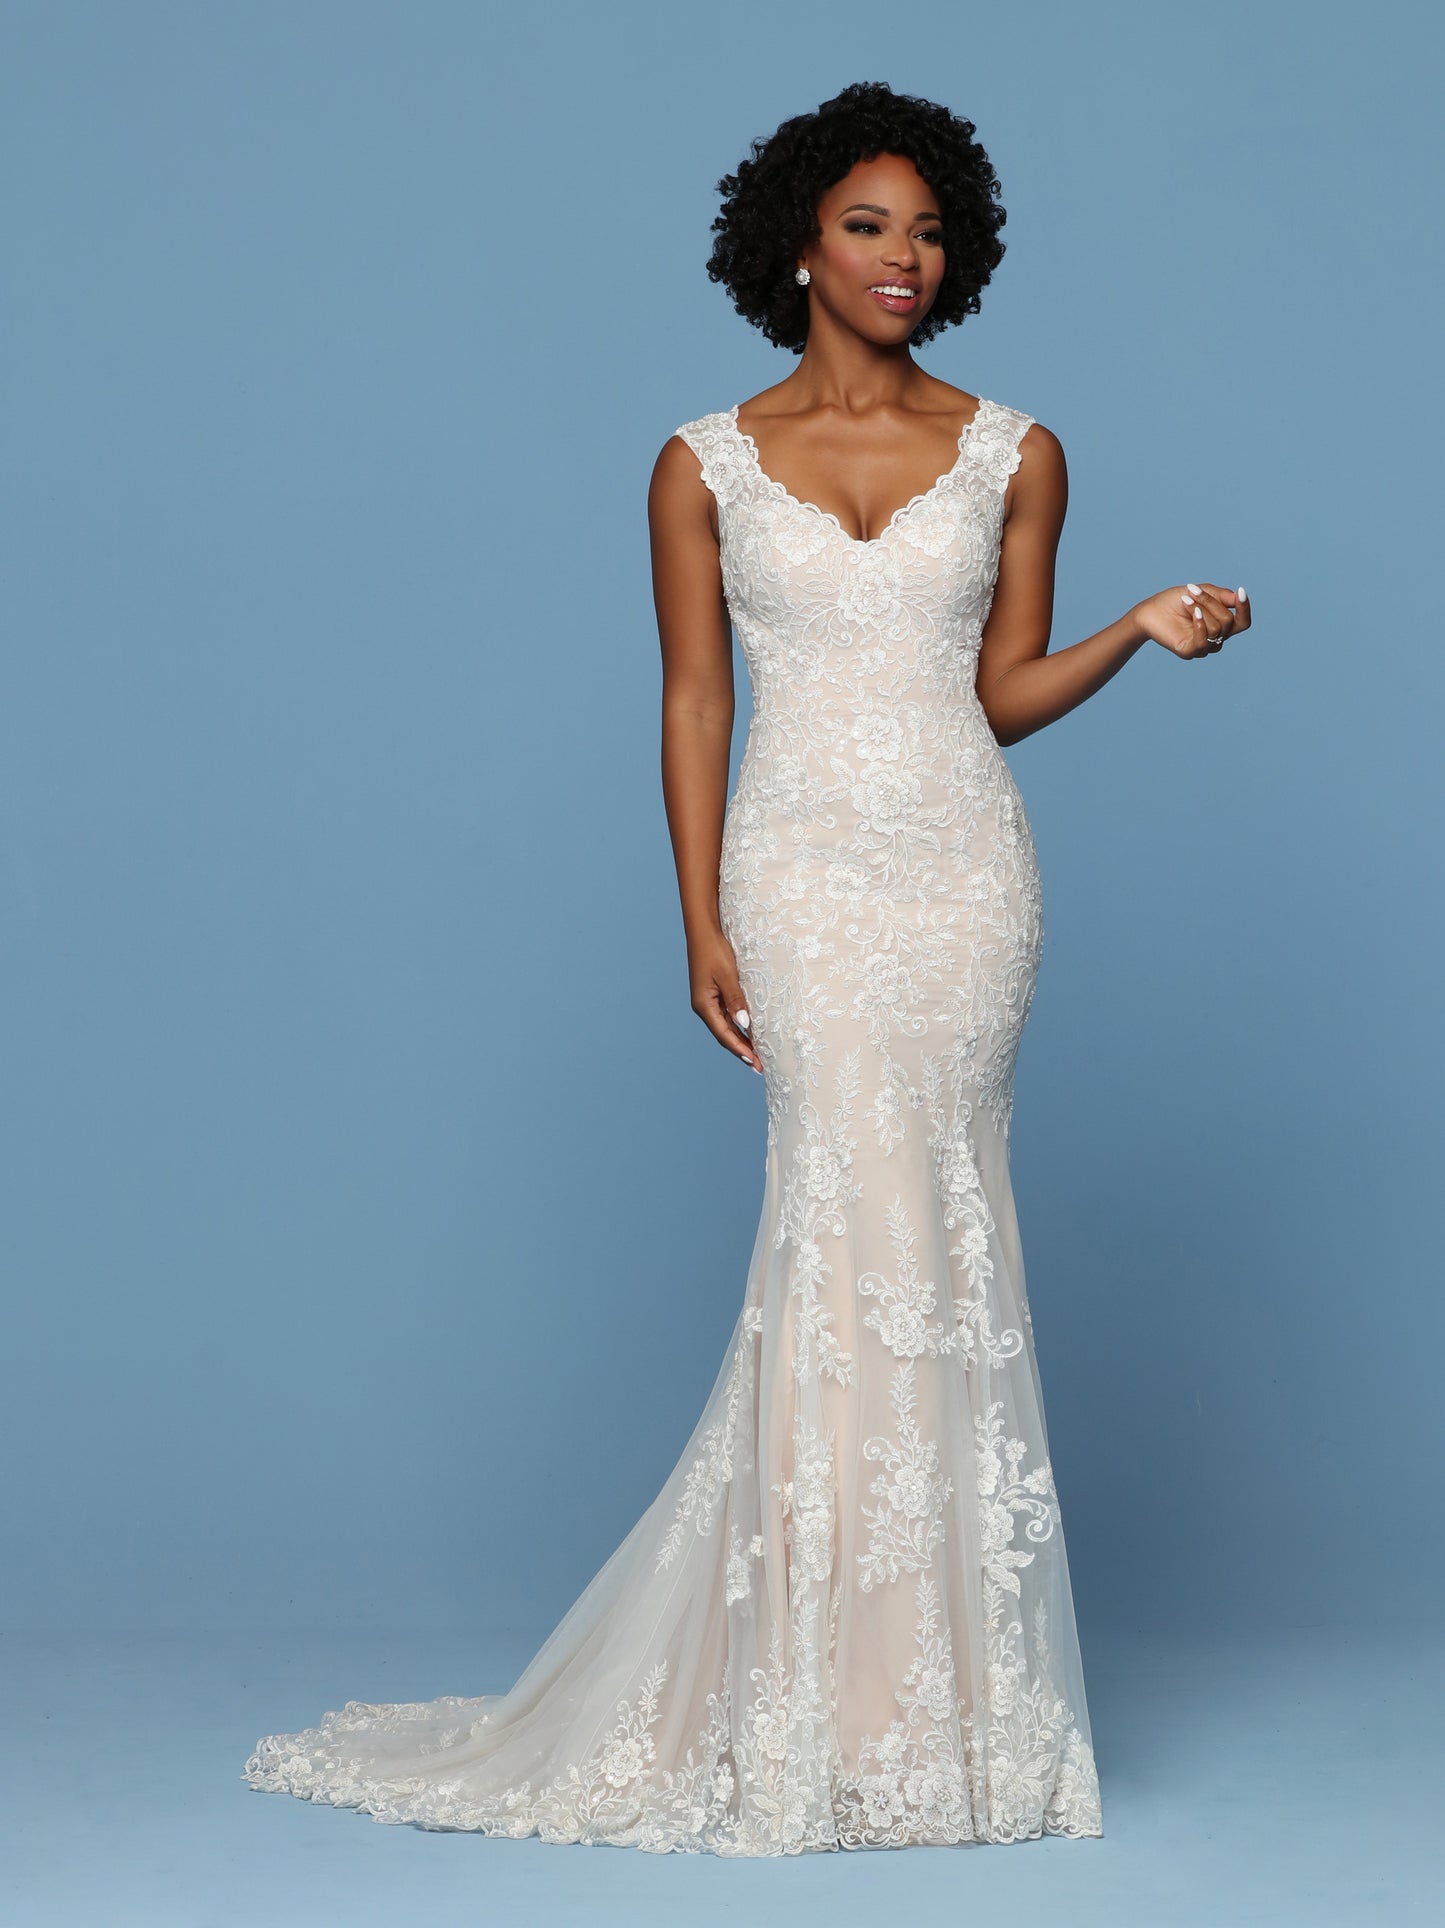 Davinci Bridal 50542 is a fitted Mermaid Wedding dress with beaded lace & Tulle. Features a lace edge V Neck with thick straps leading to a sheer lace illusion back. Buttons line the back seam. full lush trumpet skirt with a detailed lace edge along hem & train.   Available for 1-2 Week Delivery!!!  Available Sizes: 2,4,6,8,10,12,14,16,18,20  Available Colors: Ivory/Ivory, Ivory/Rose